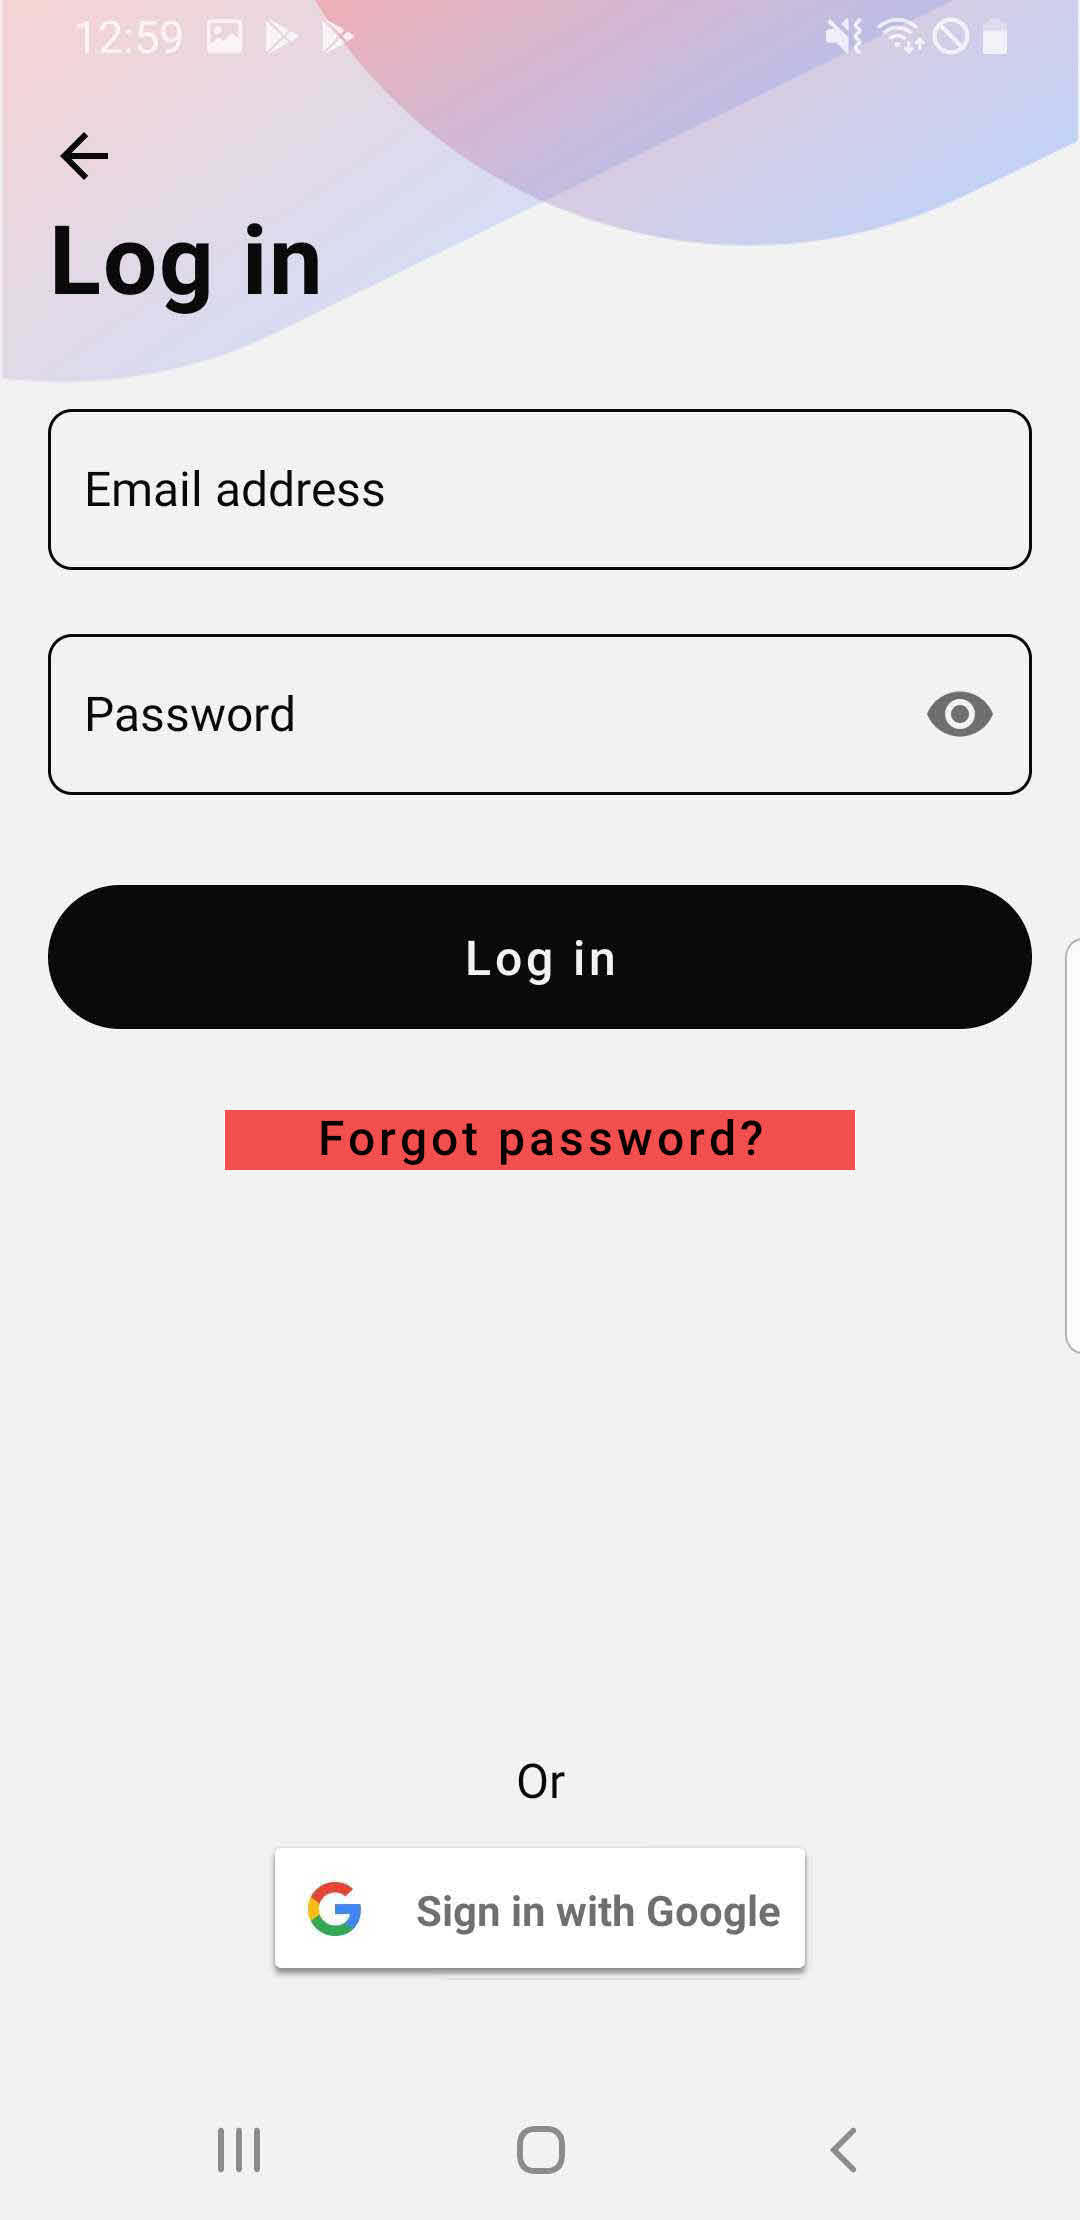 FAQ - frequently asked questions: Forgot password screen sonamedic